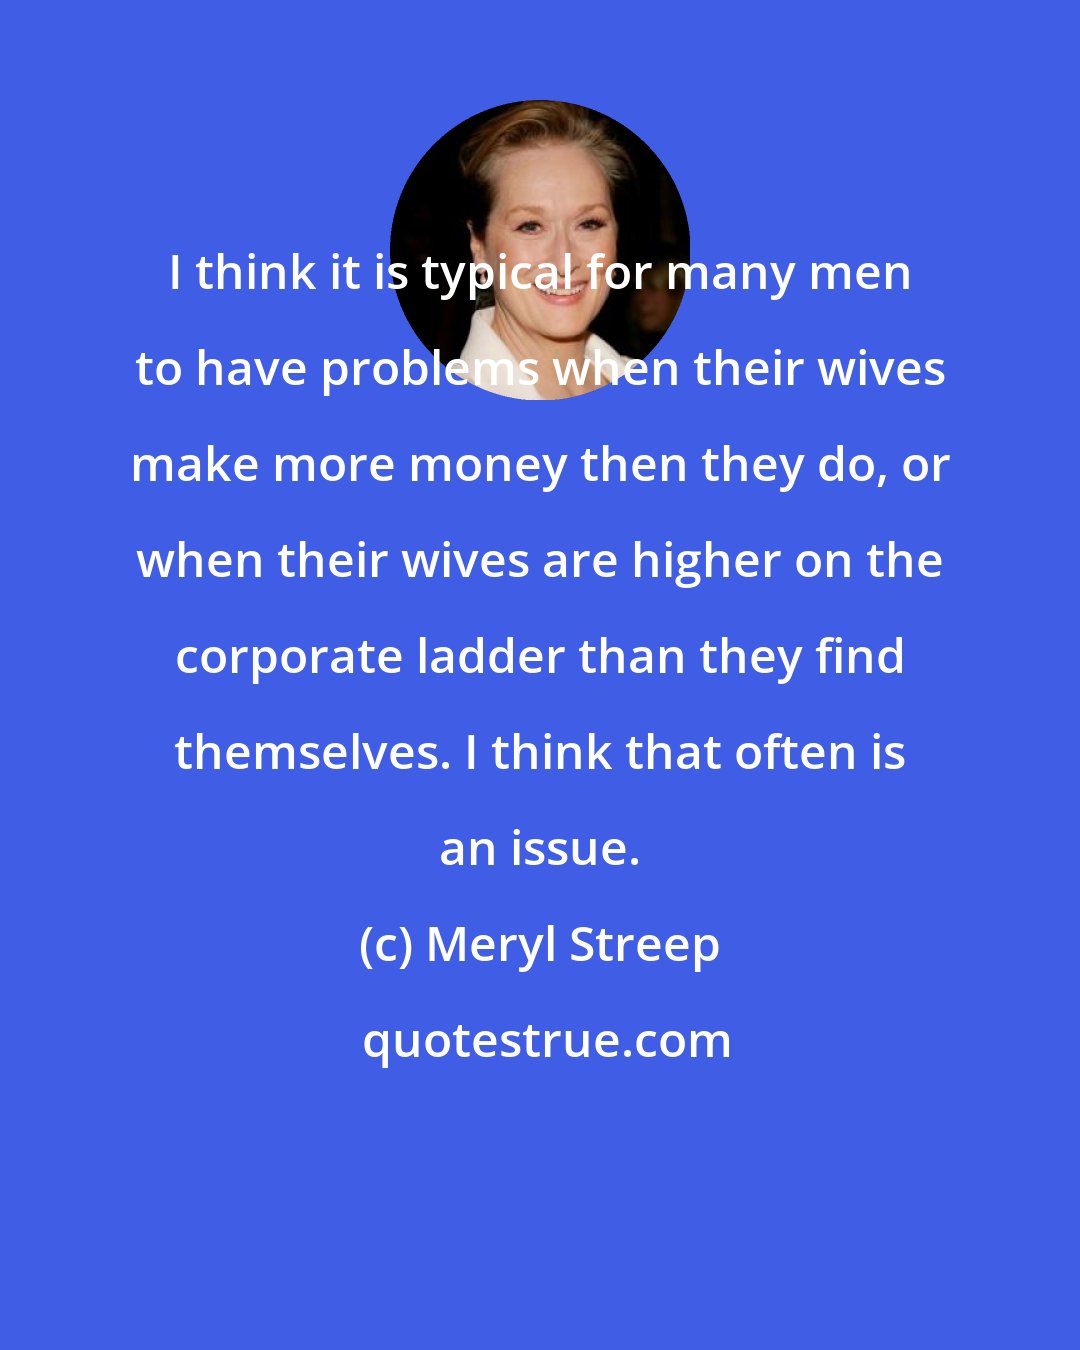 Meryl Streep: I think it is typical for many men to have problems when their wives make more money then they do, or when their wives are higher on the corporate ladder than they find themselves. I think that often is an issue.